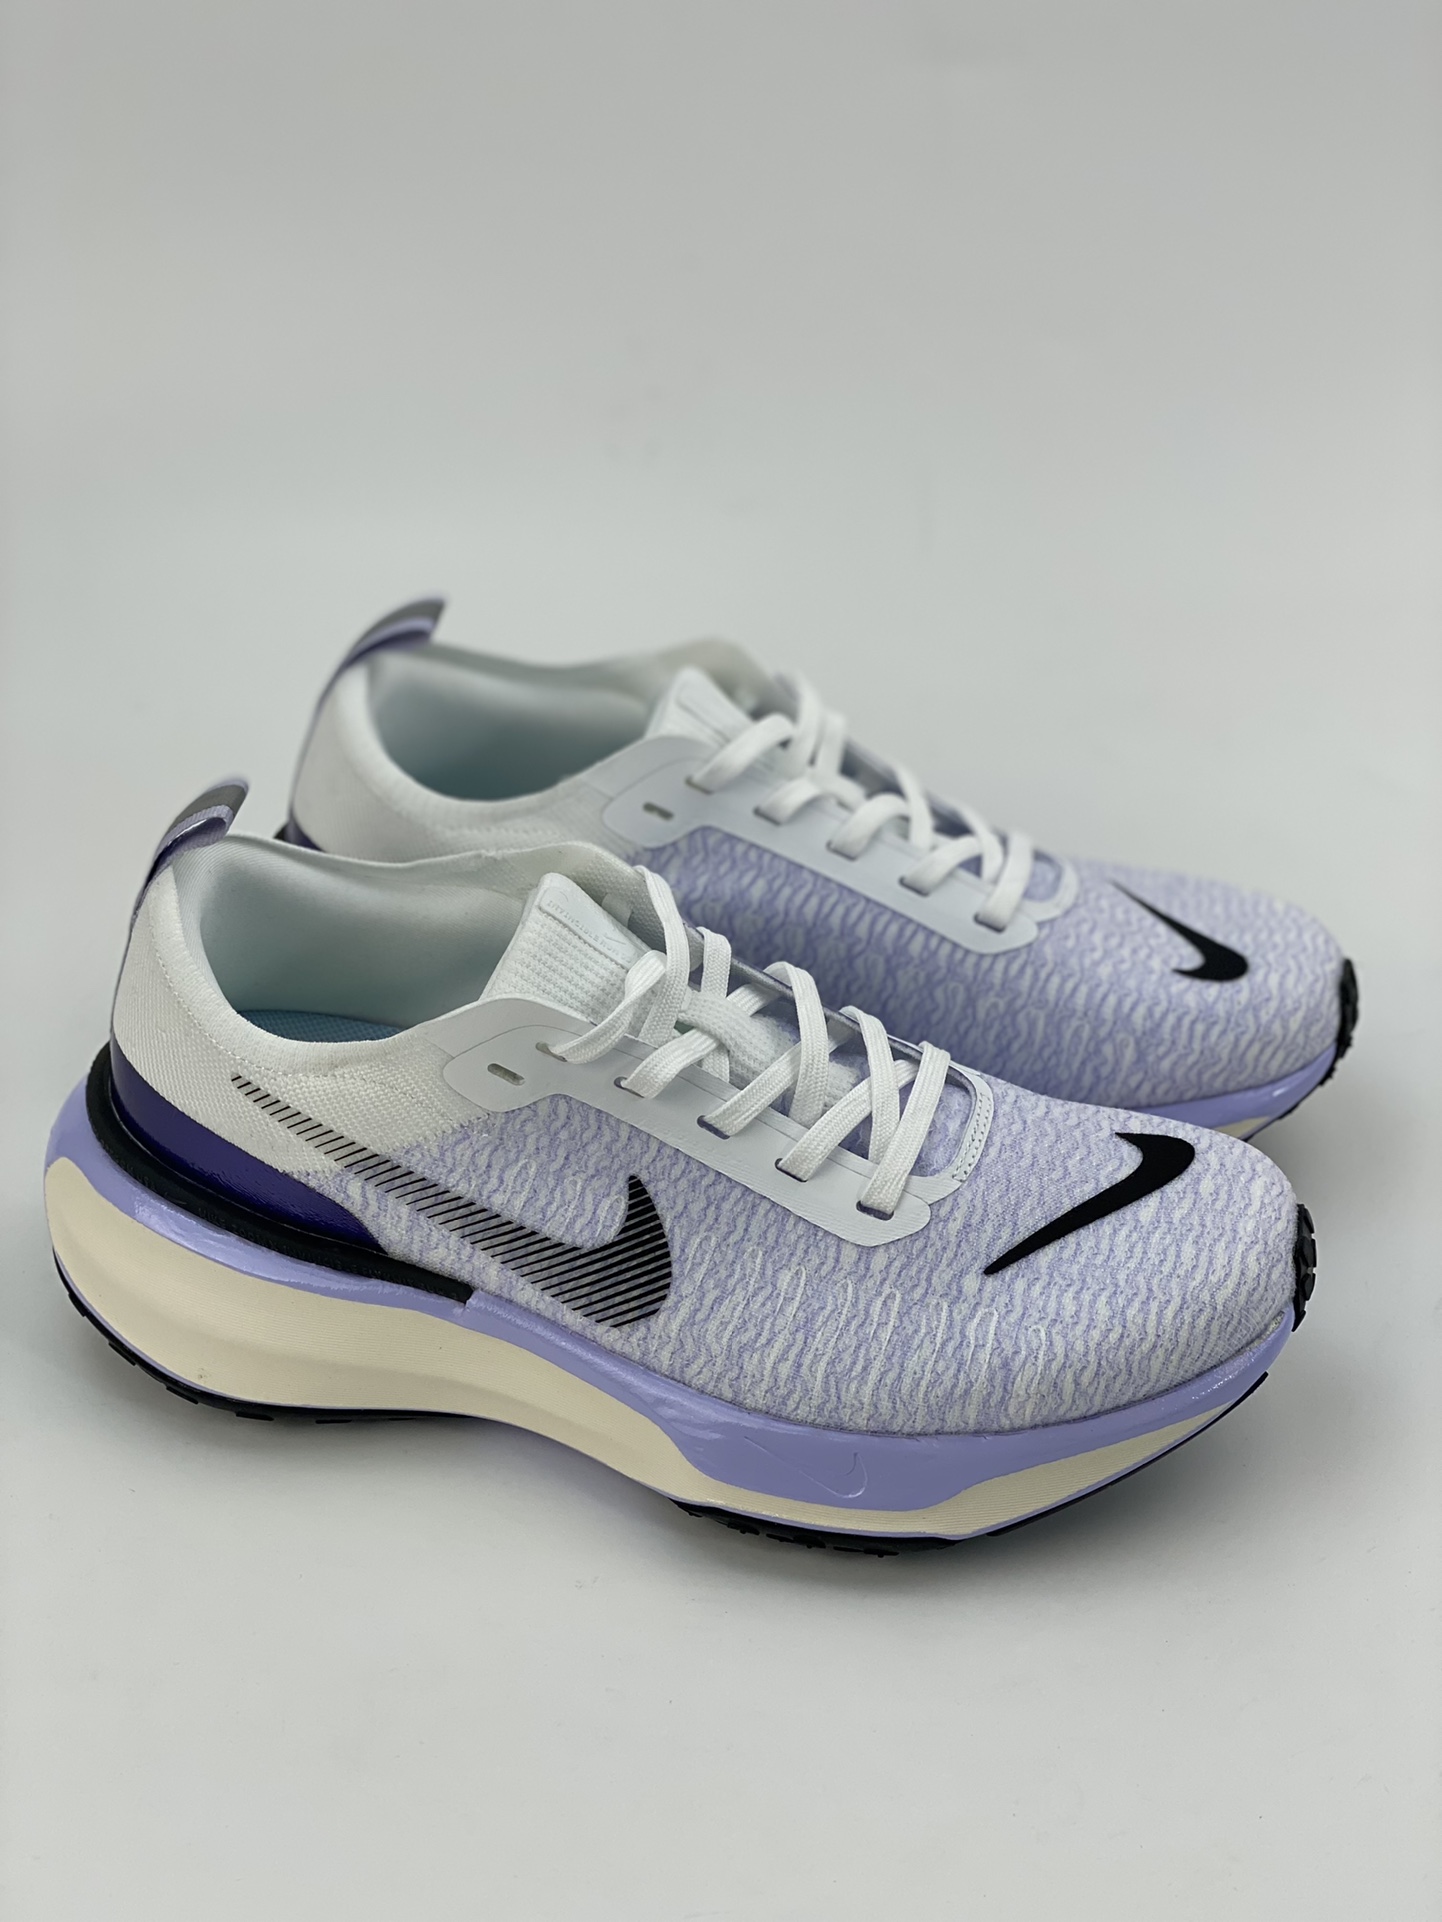 NIKE Zoom X Invincible Run Fk 3 Marathon Functional Style Sports Shoes DR2660-207